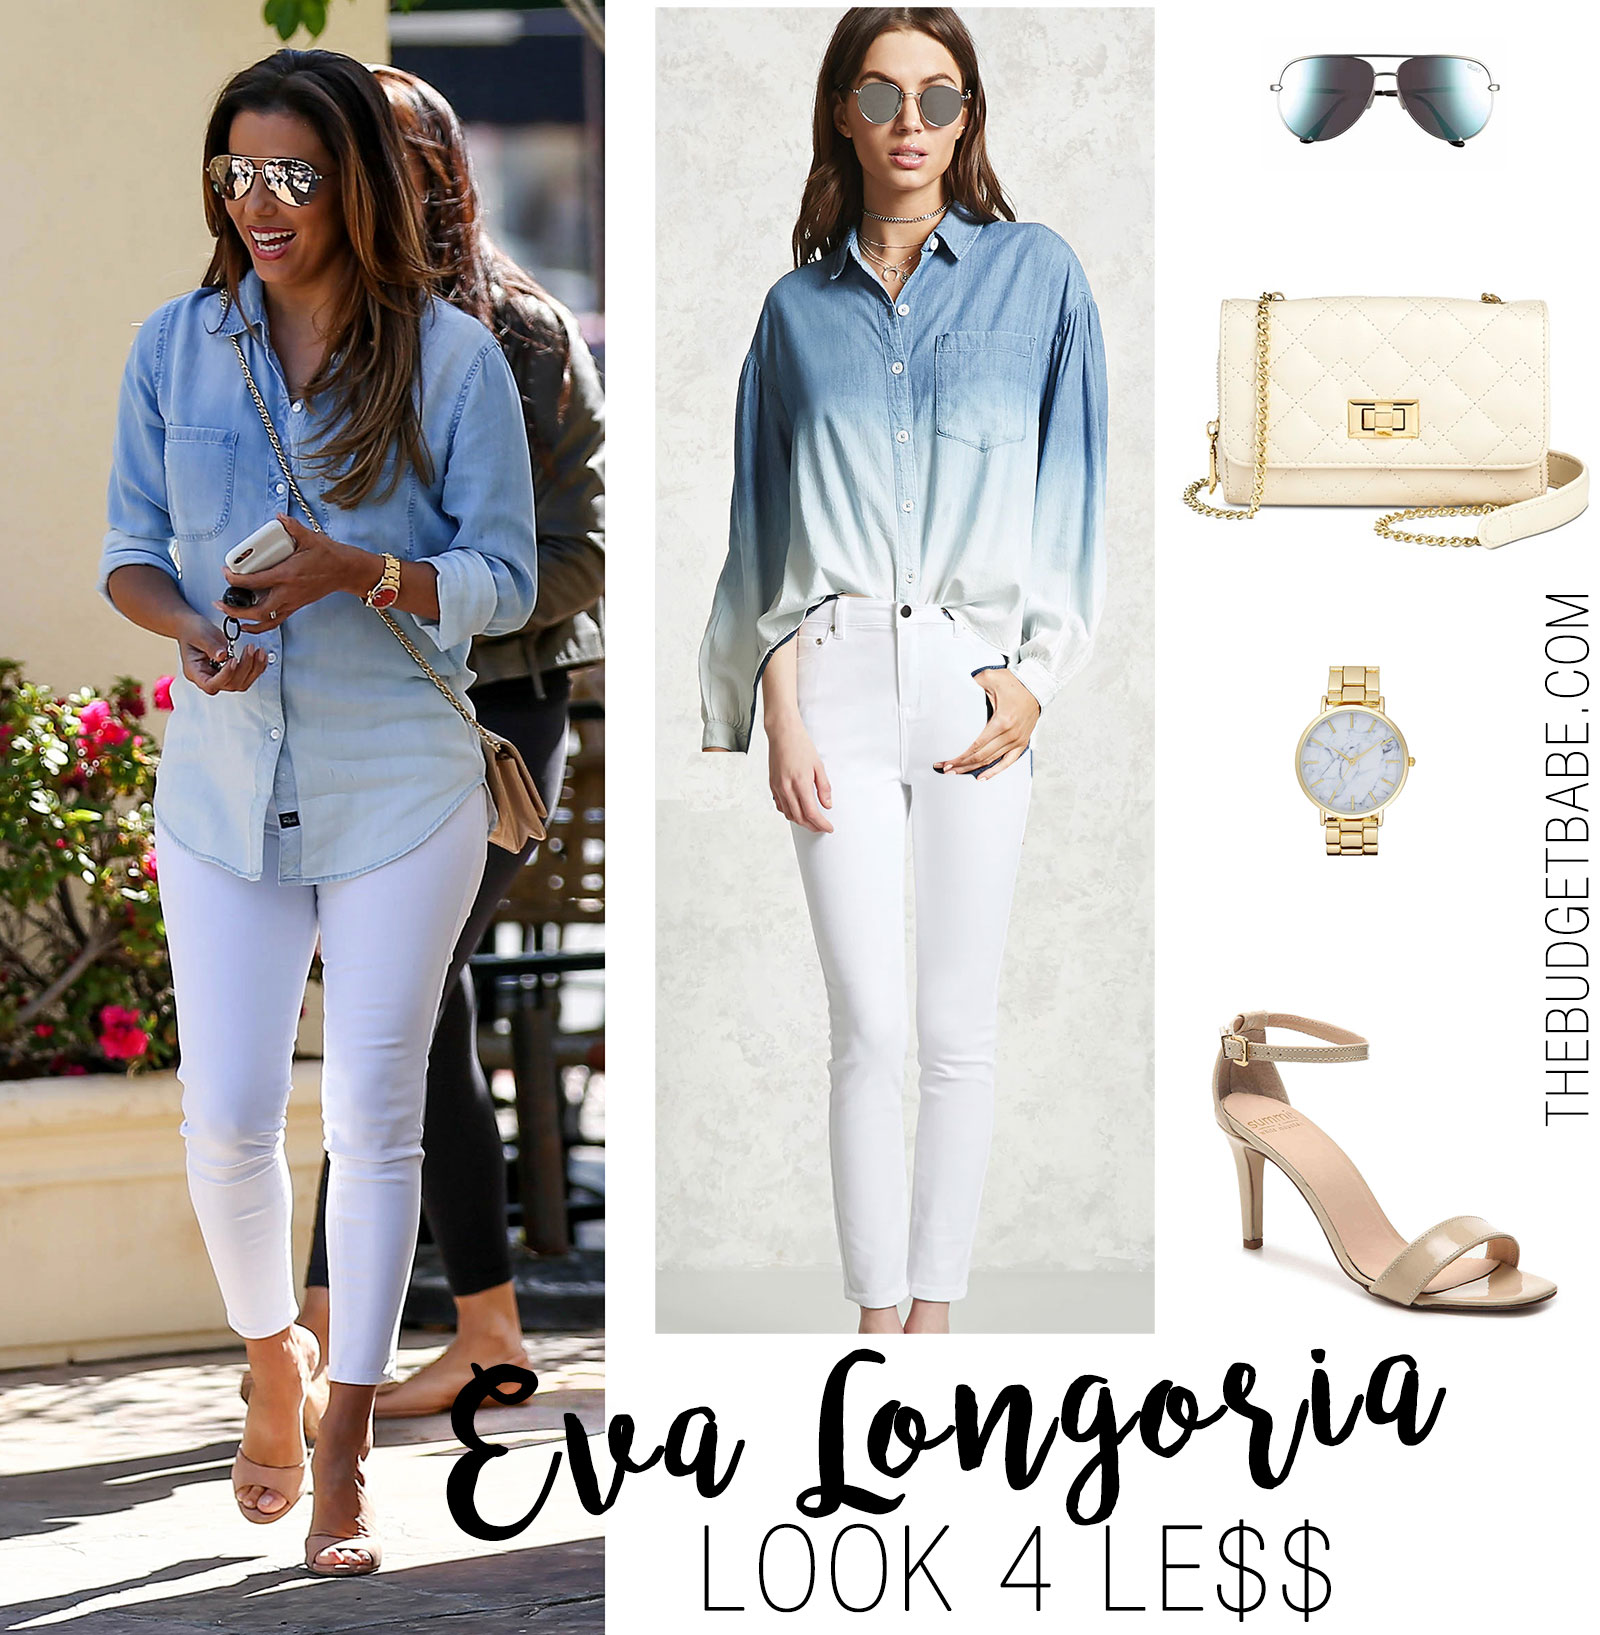 Eva Longoria is all smiles in her ombre denim shirt, white skinny jeans, and nude slide heels.